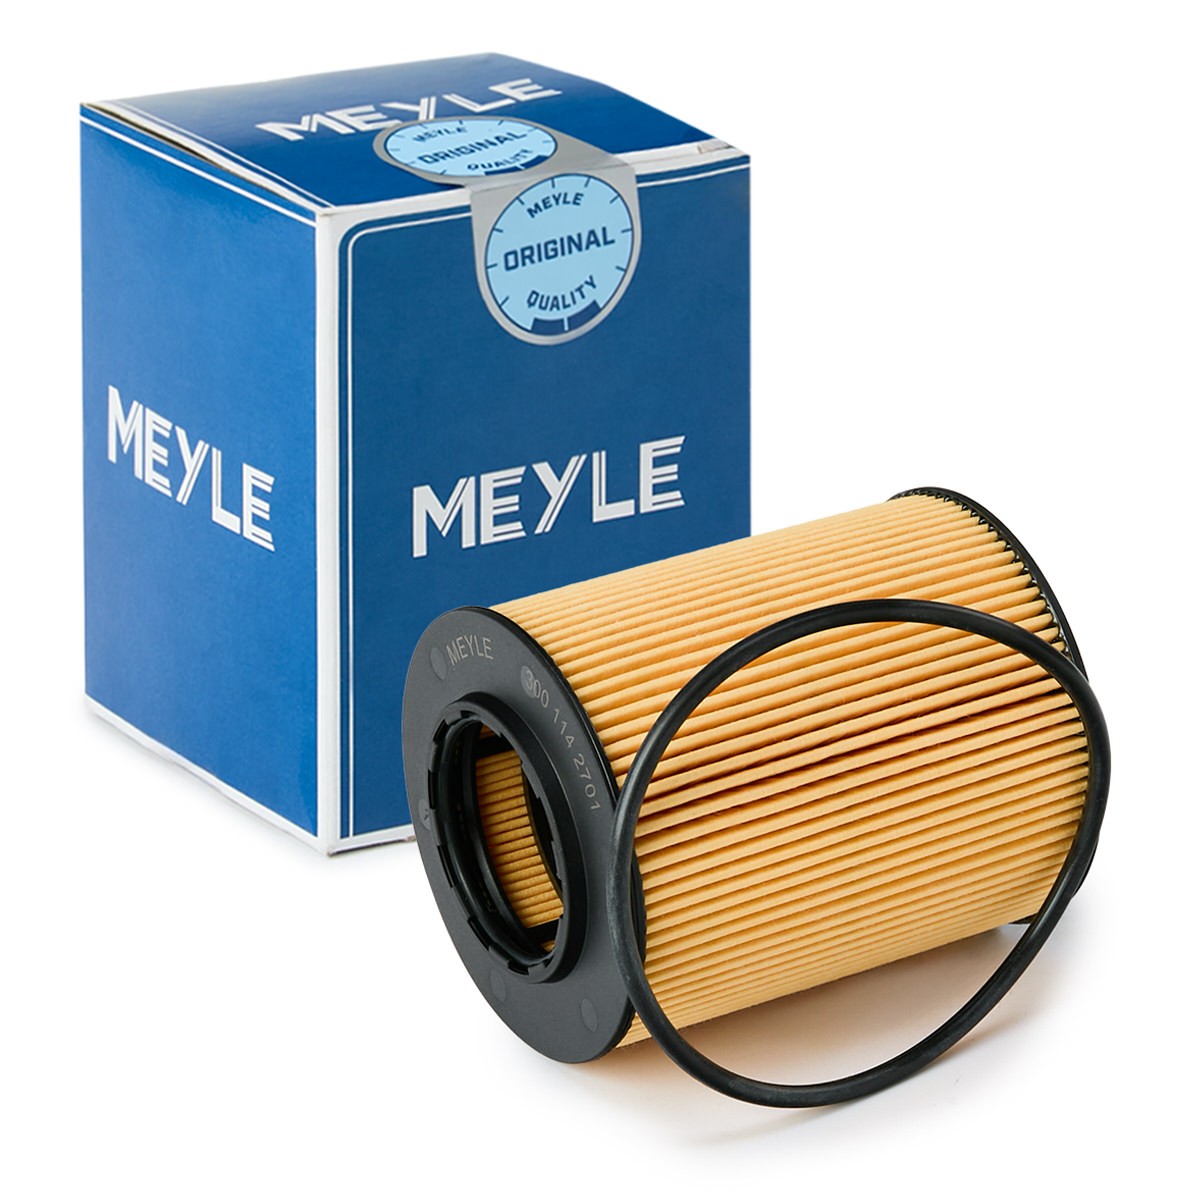 MEYLE 3001142701 Engine oil filter ORIGINAL Quality, with seal, Filter Insert